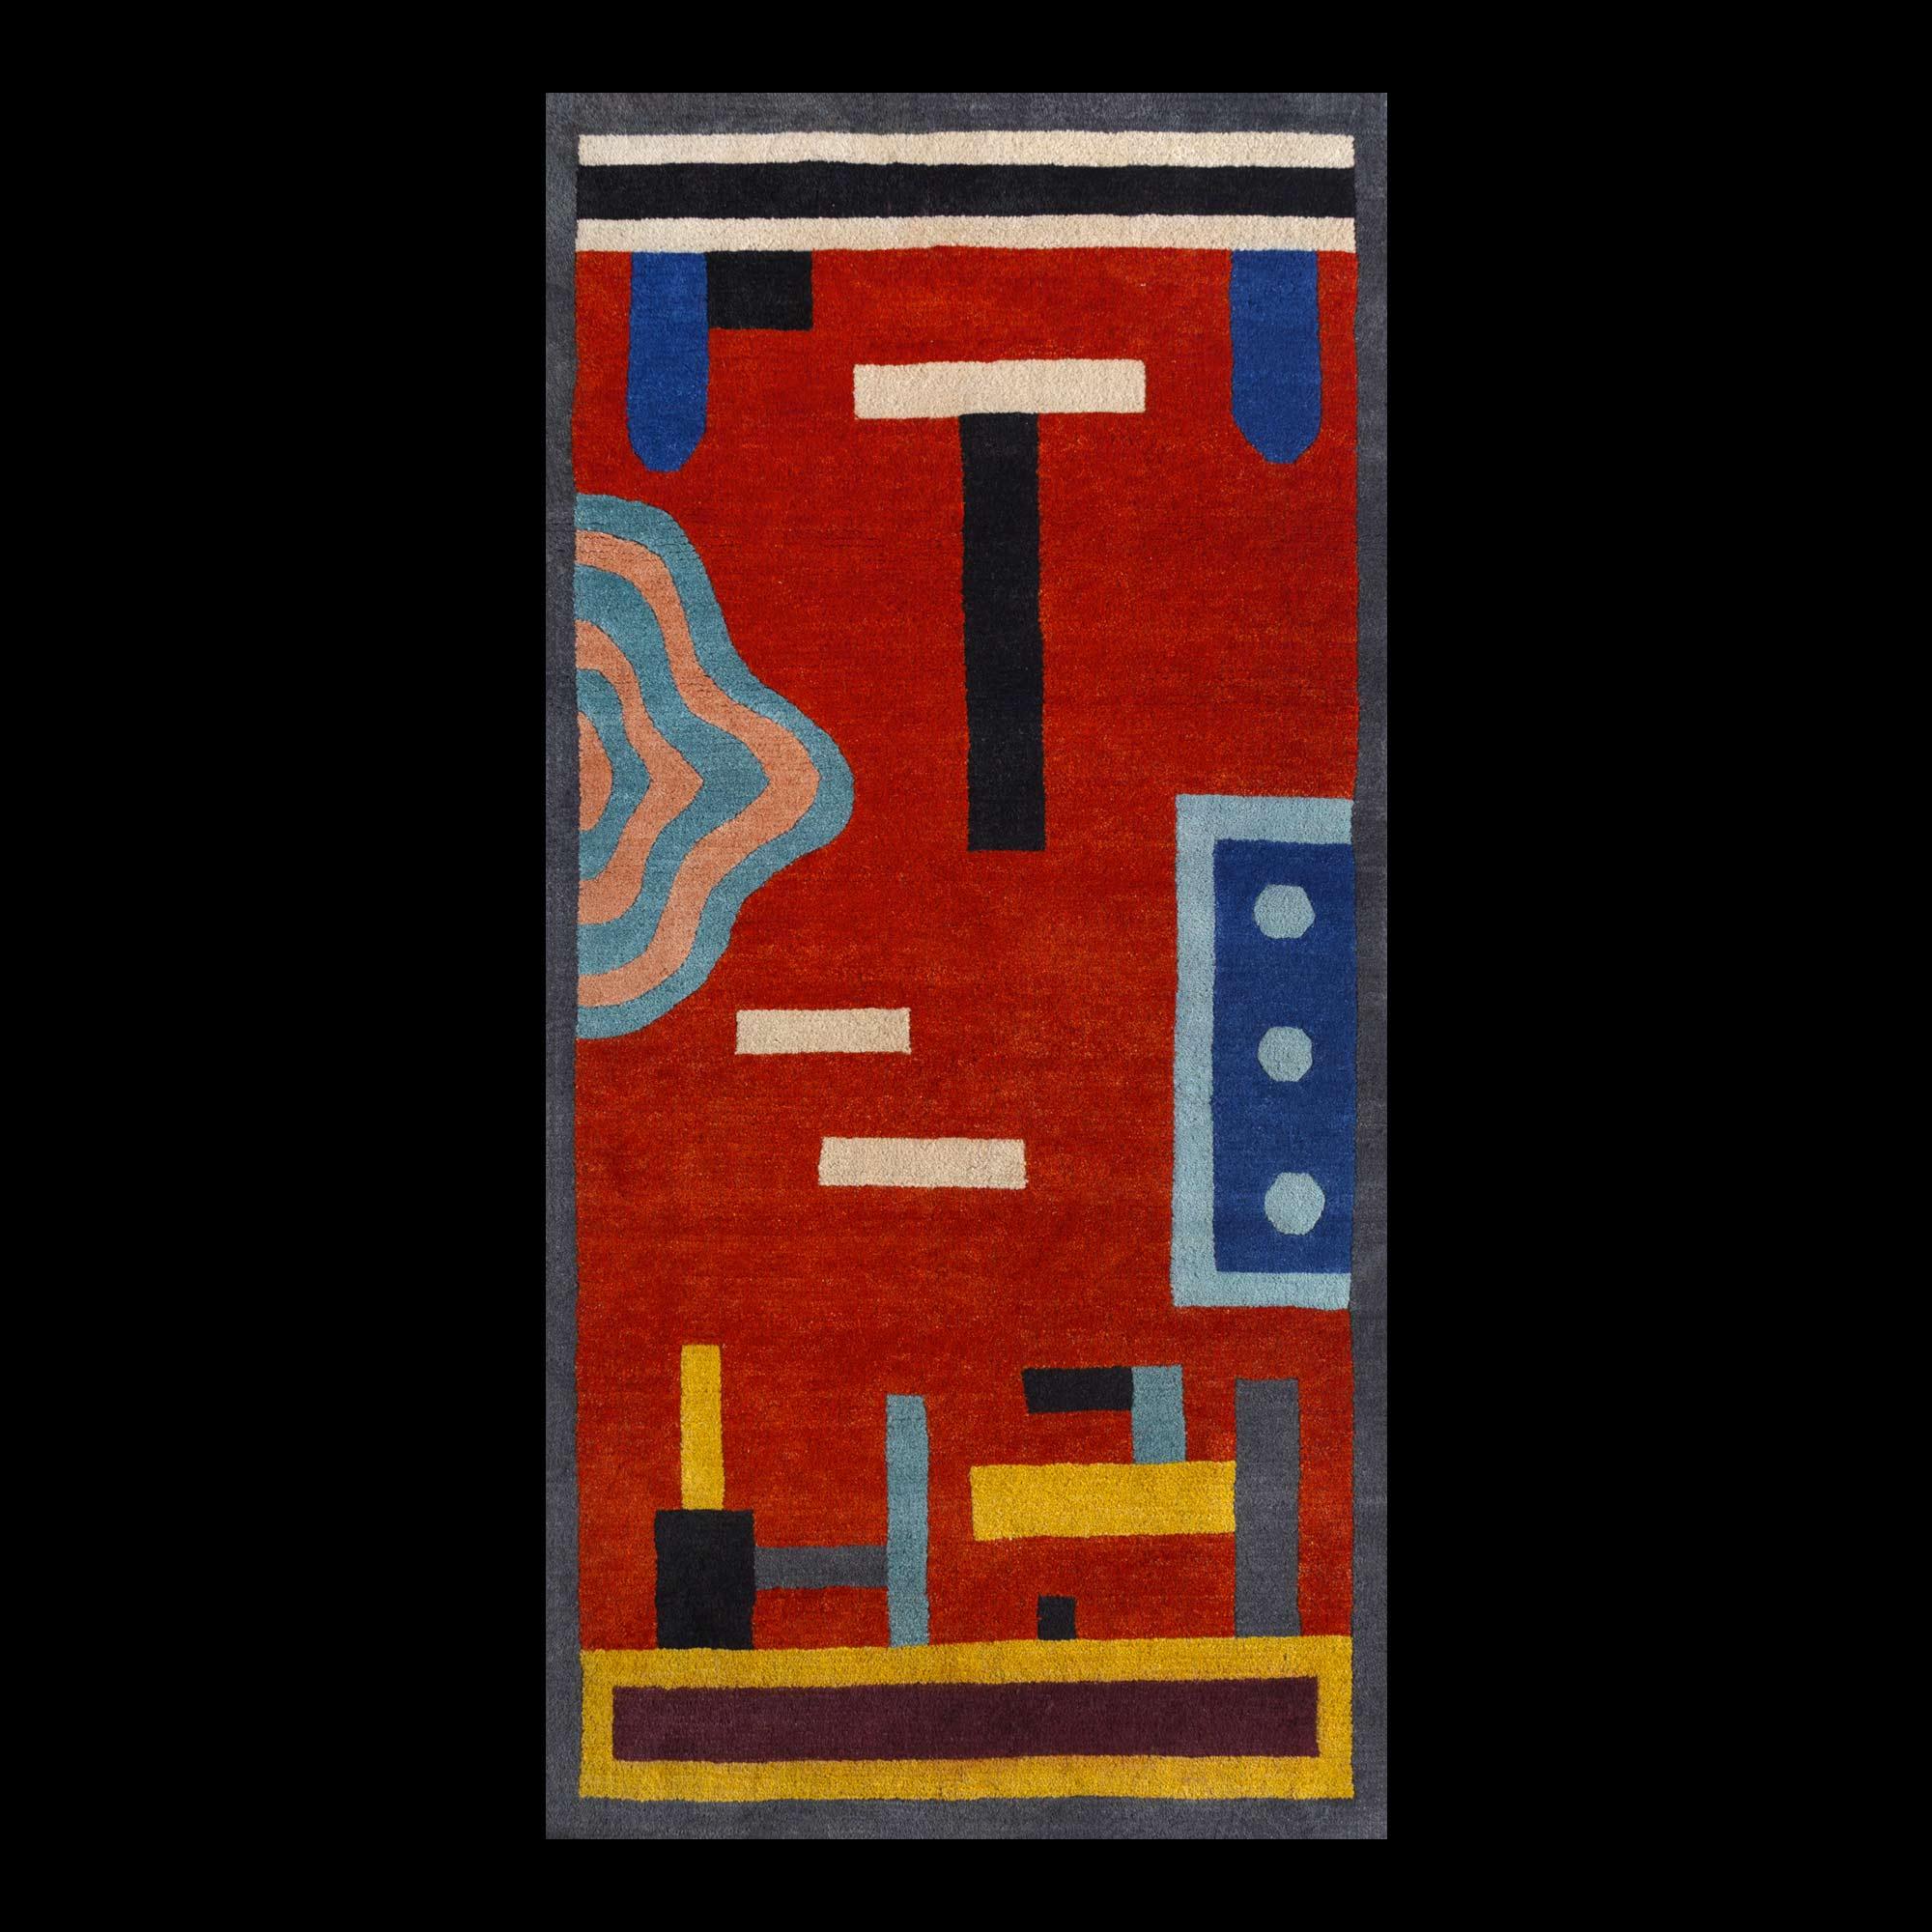 NDP54 woollen carpet by Nathalie Du Pasquier for Post Design collection/Memphis

A woollen carpet handcrafted by different Nepalese artisans. Made in a limited edition of 36 signed, numbered examples.

As the carpet is made by hand, there are